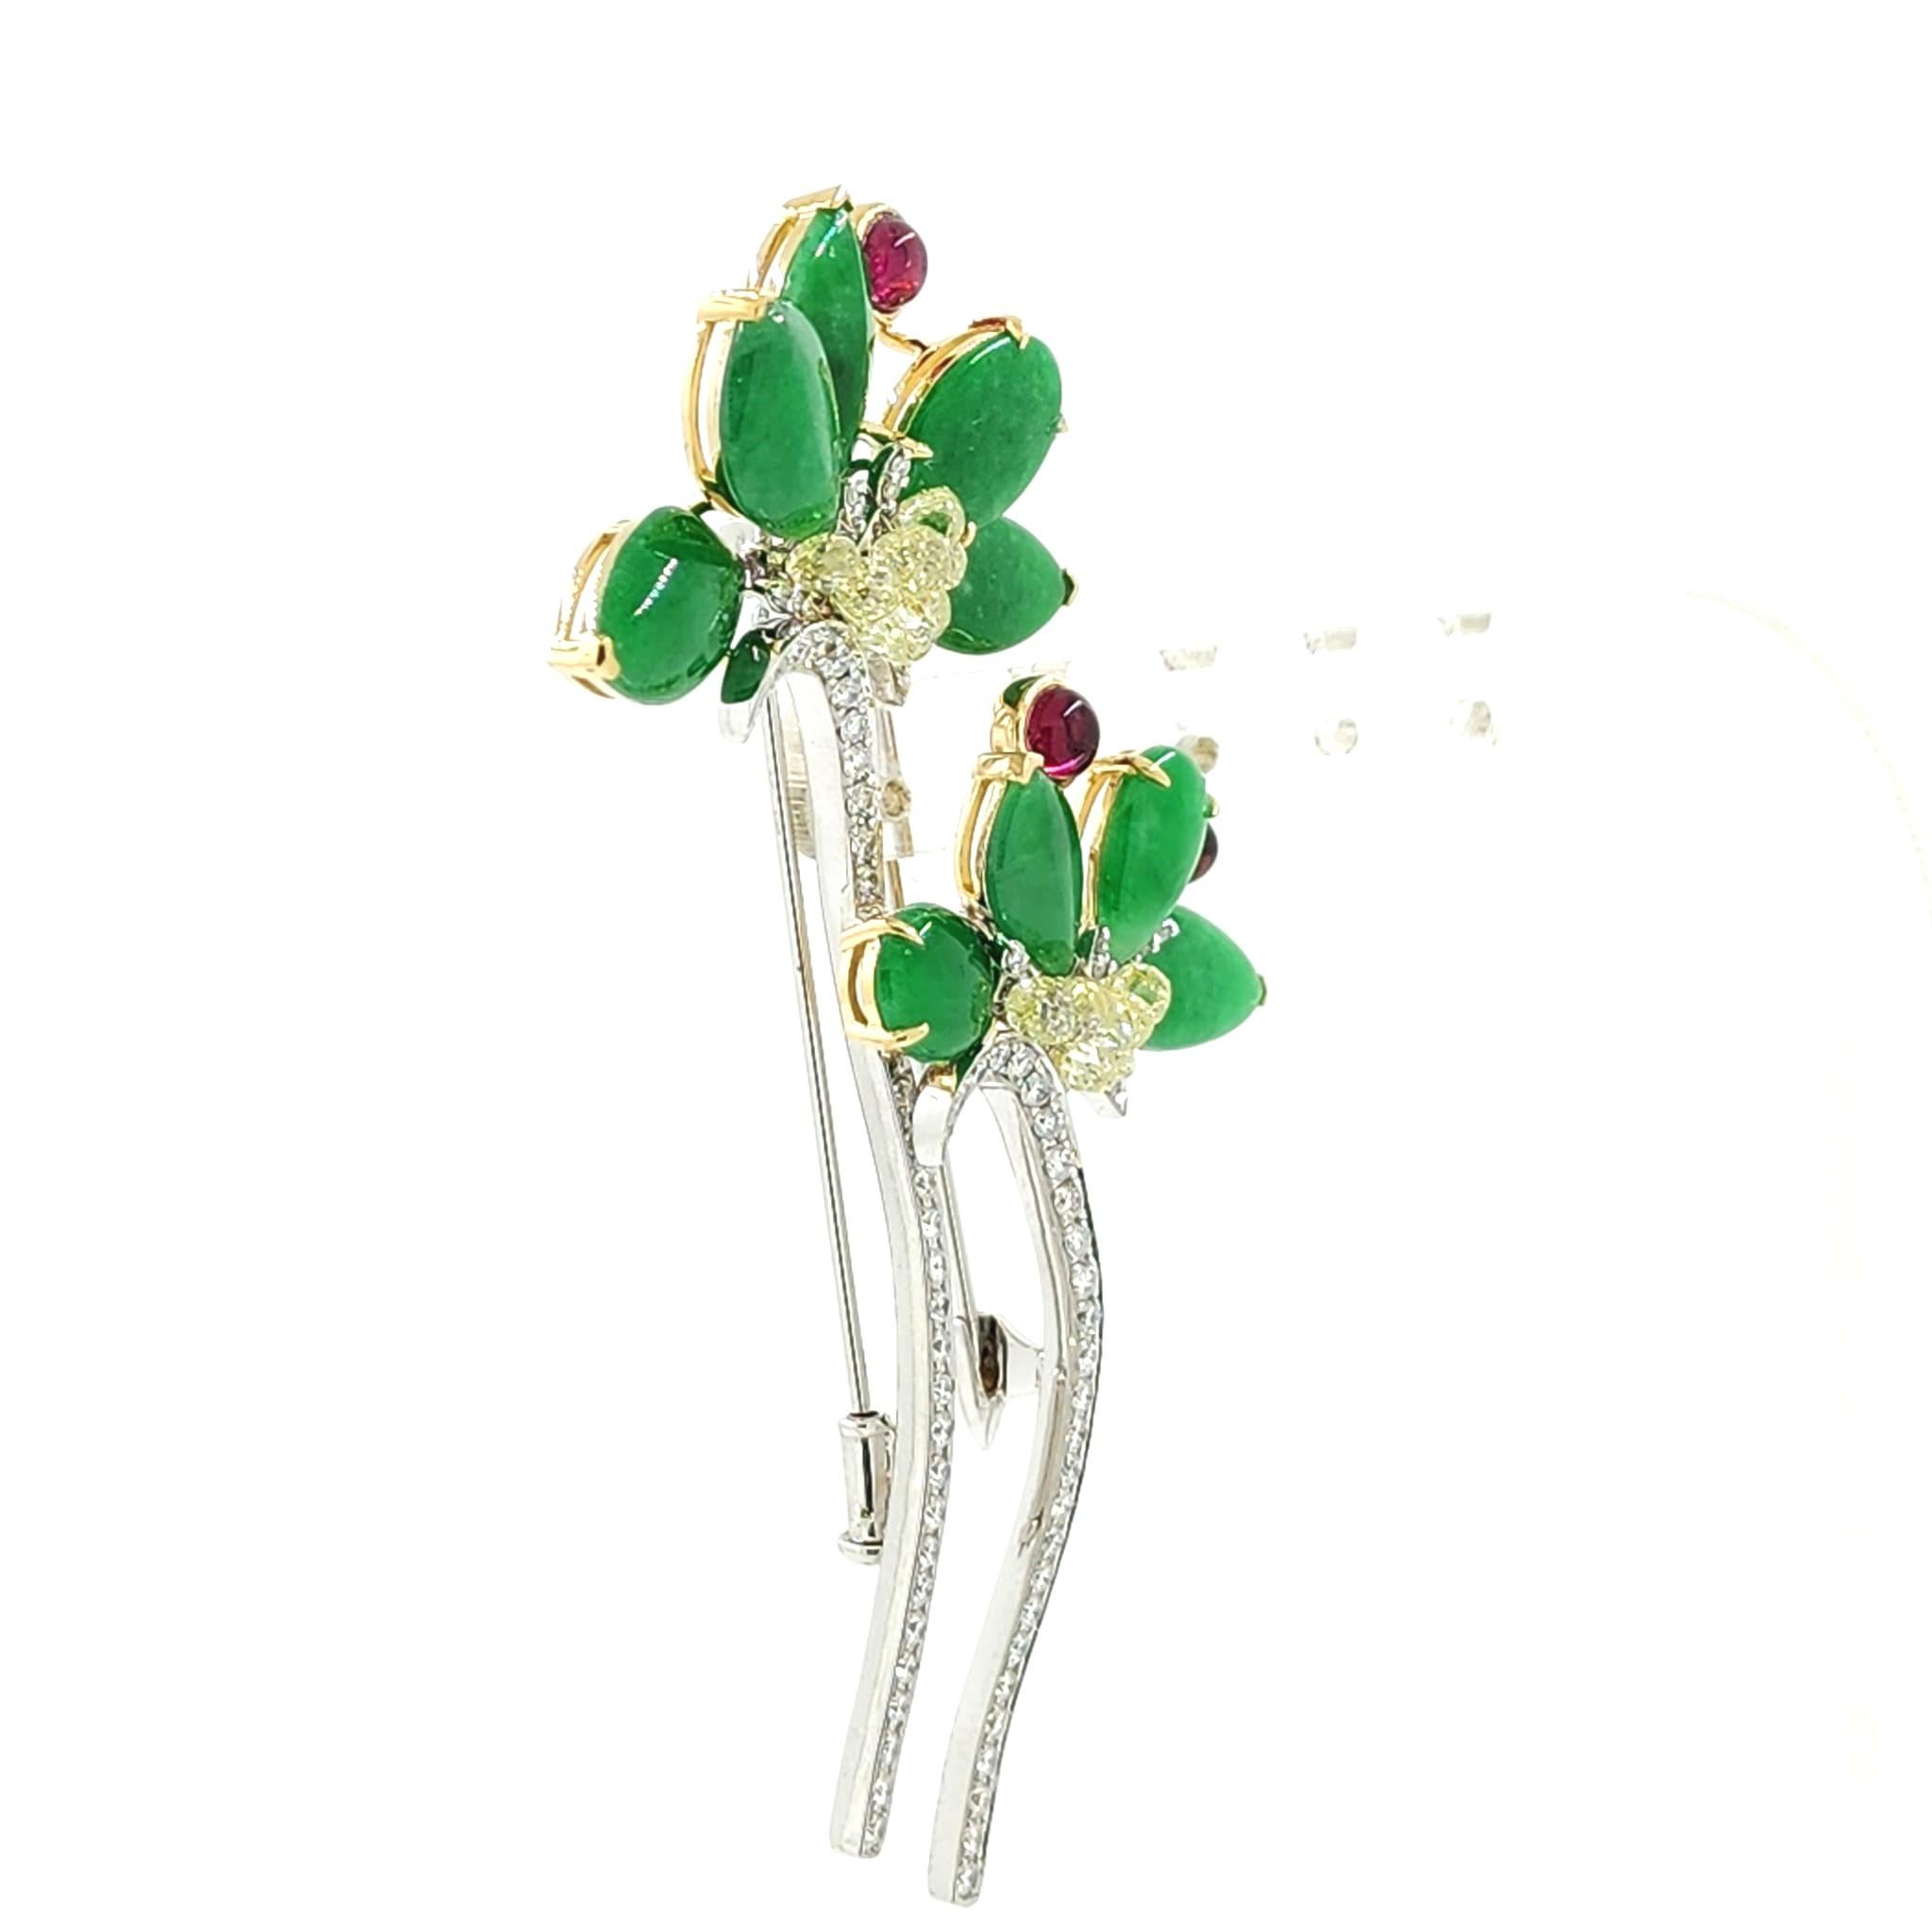 Uncut Jadeite Tourmaline and Diamond Flower Brooch in 18 Karat White and Yellow Gold For Sale